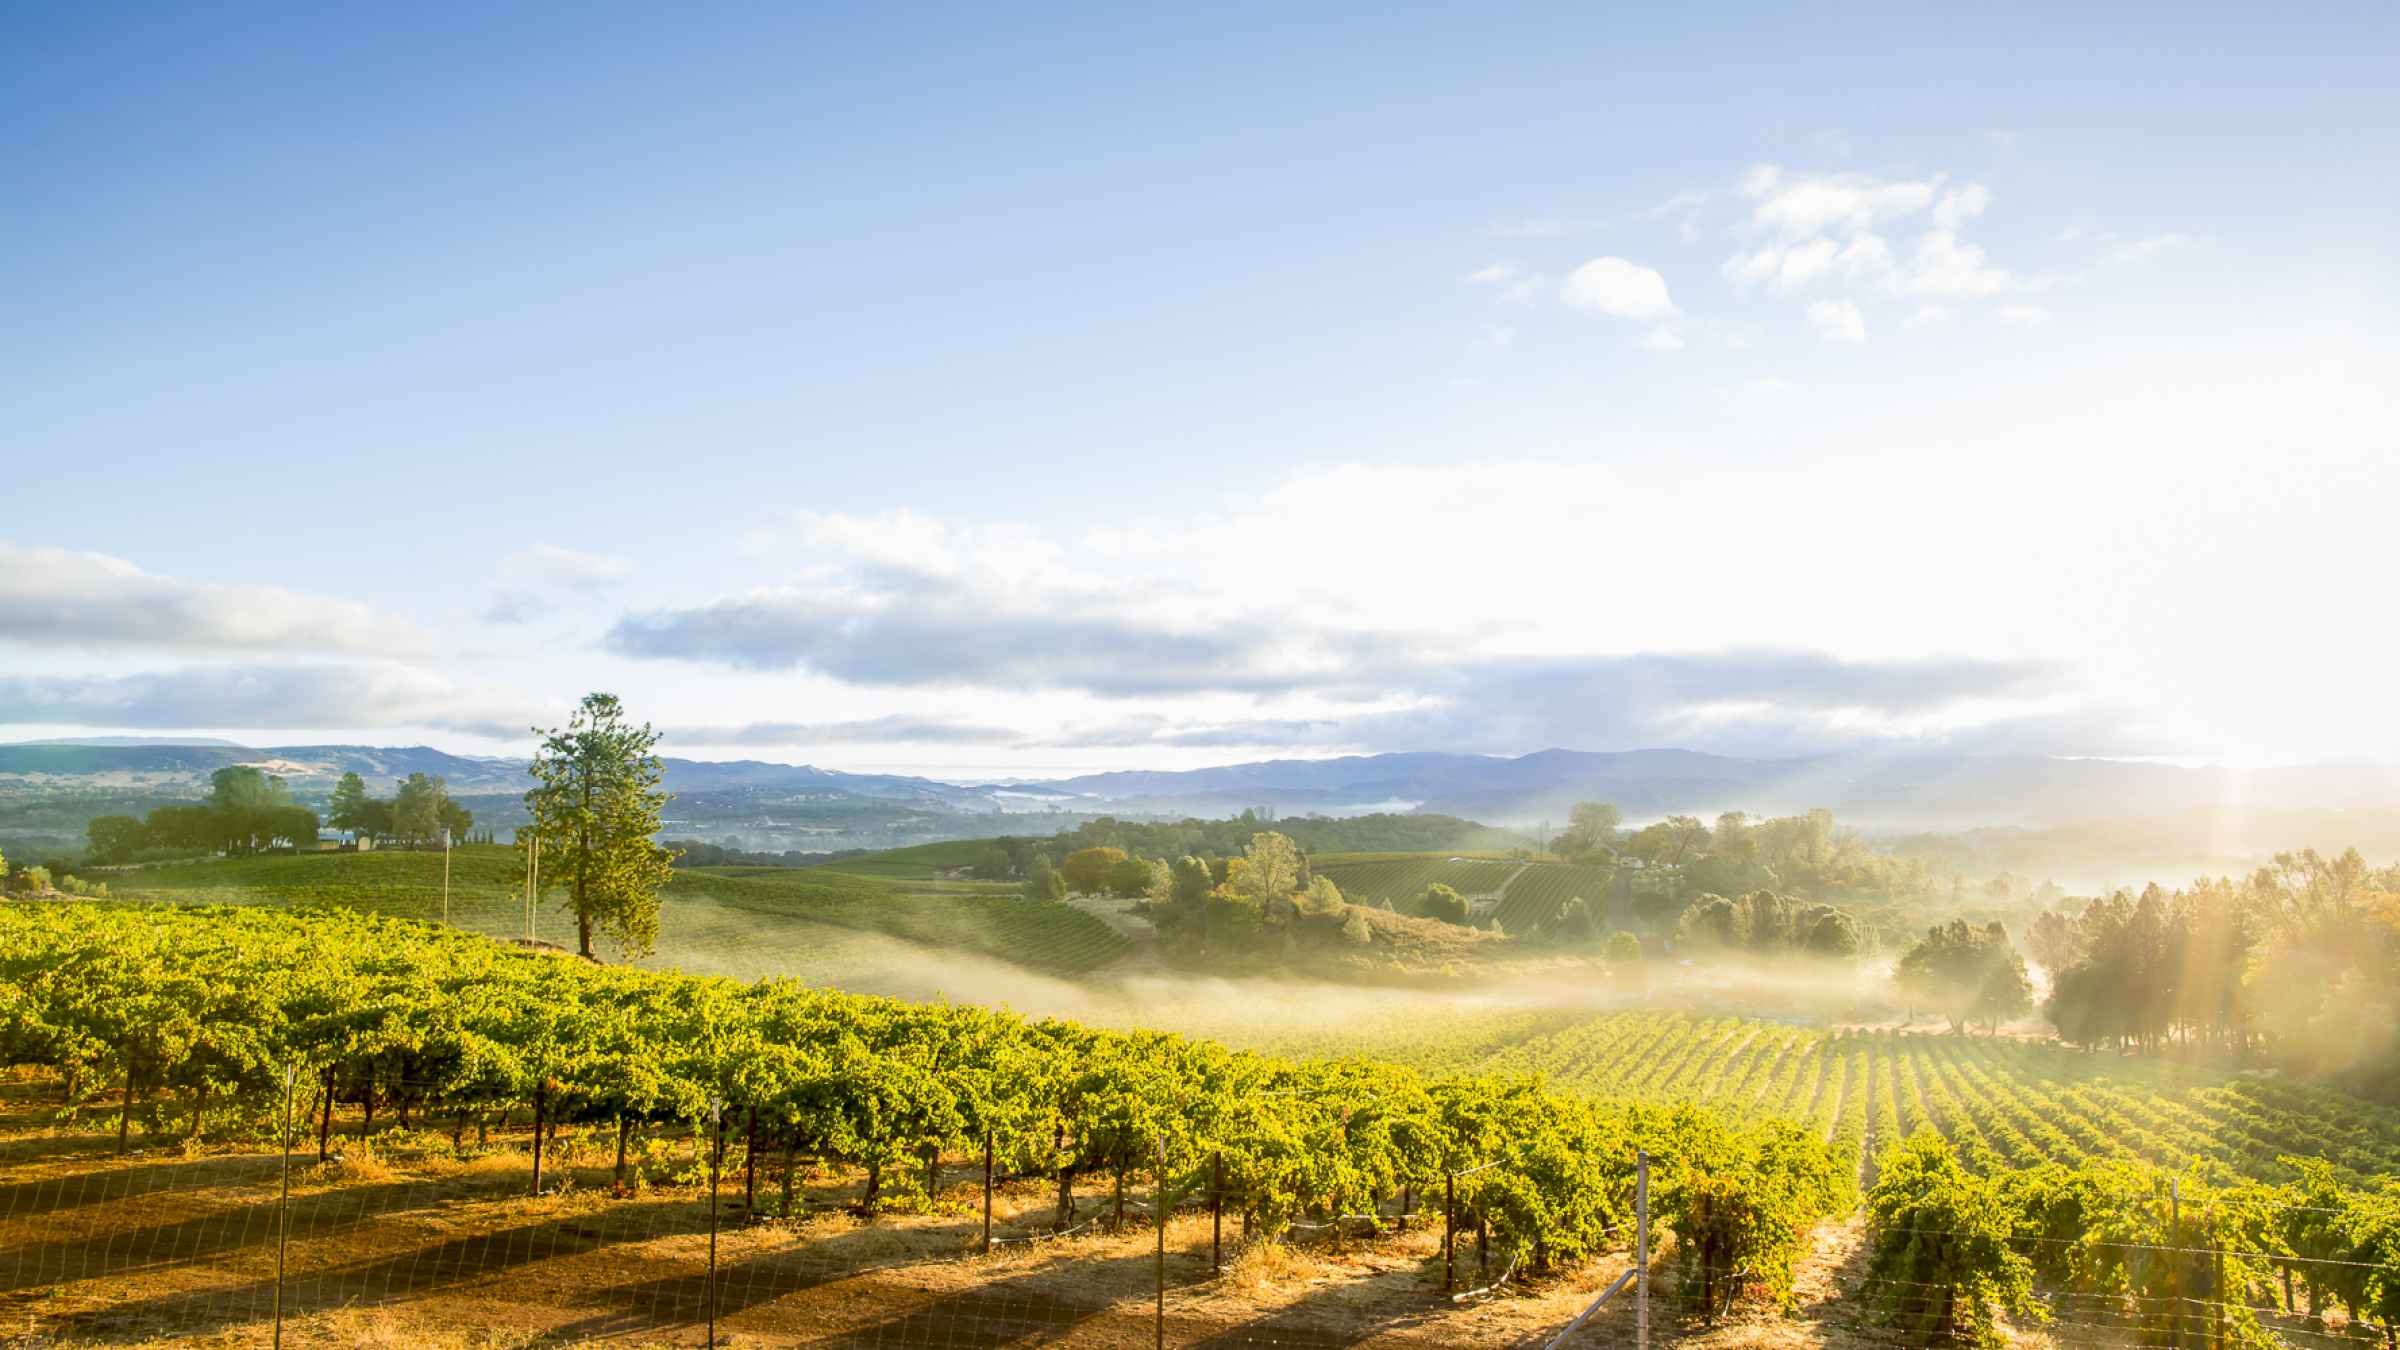 Sonoma Valley 2021 Top 10 Tours & Activities (with Photos) Things to